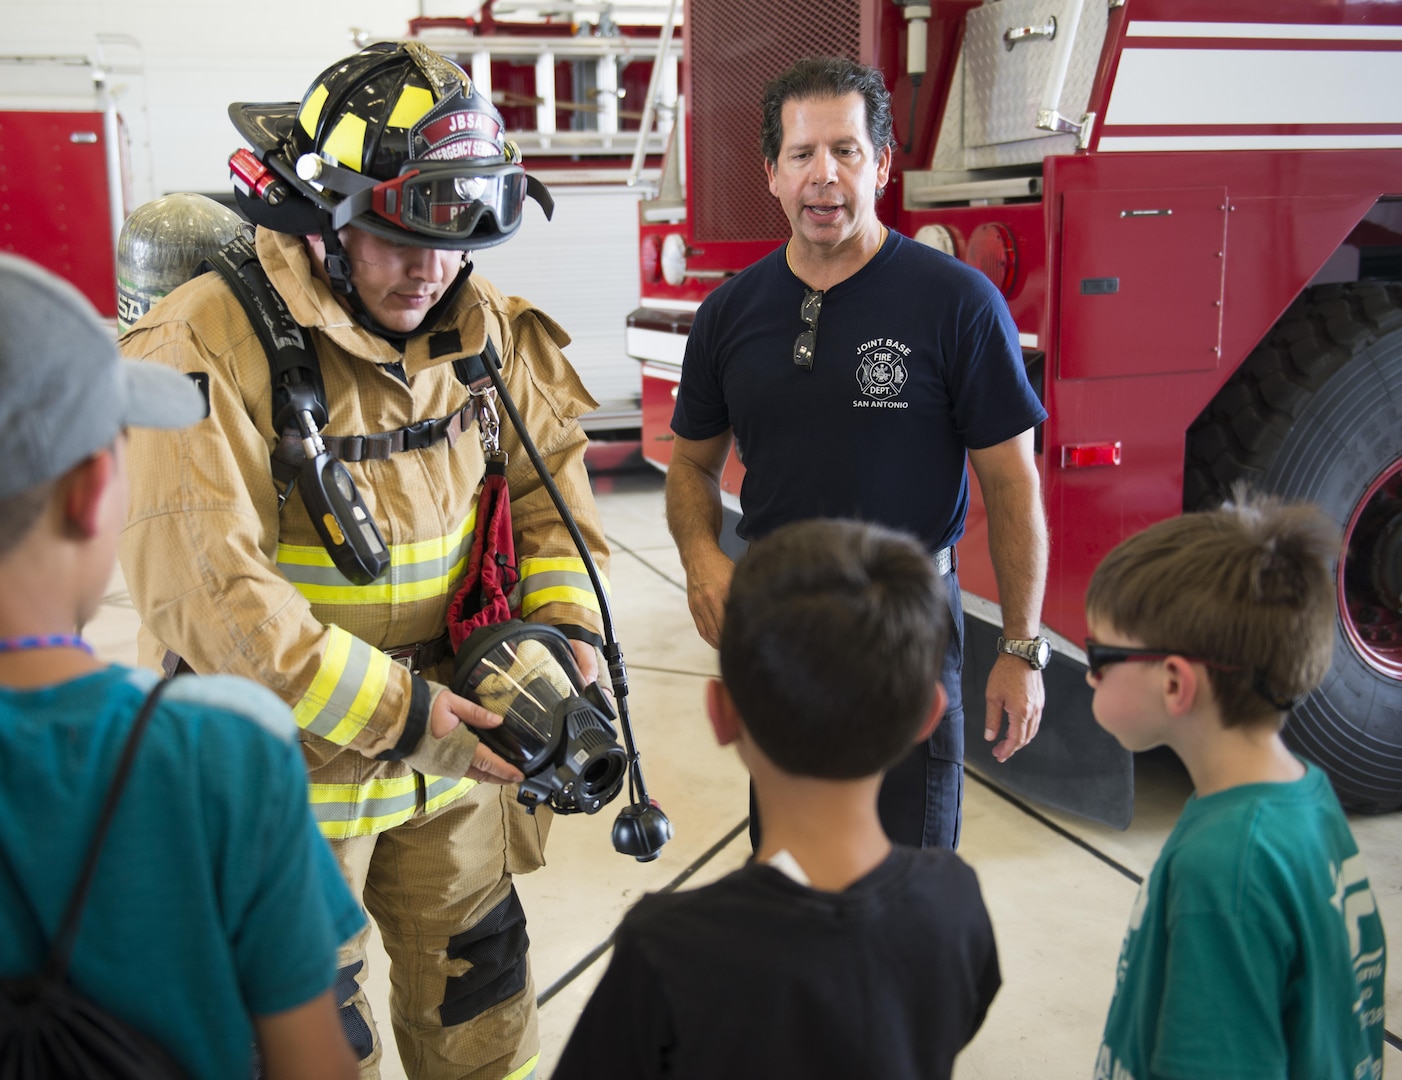 Jeffery Pardo (left), 502nd Civil Engineering Squadron firefighter, shows off his fire protection gear as Michael Martinez, 502nd CES firefighter, explains it to children from Vibrant ABA Solutions during a open house tour of Fire Station 2 June 23, 2017, at Joint Base San Antonio-Lackland, Texas. (U.S. Air Force photo by Senior Airman Krystal Wright)